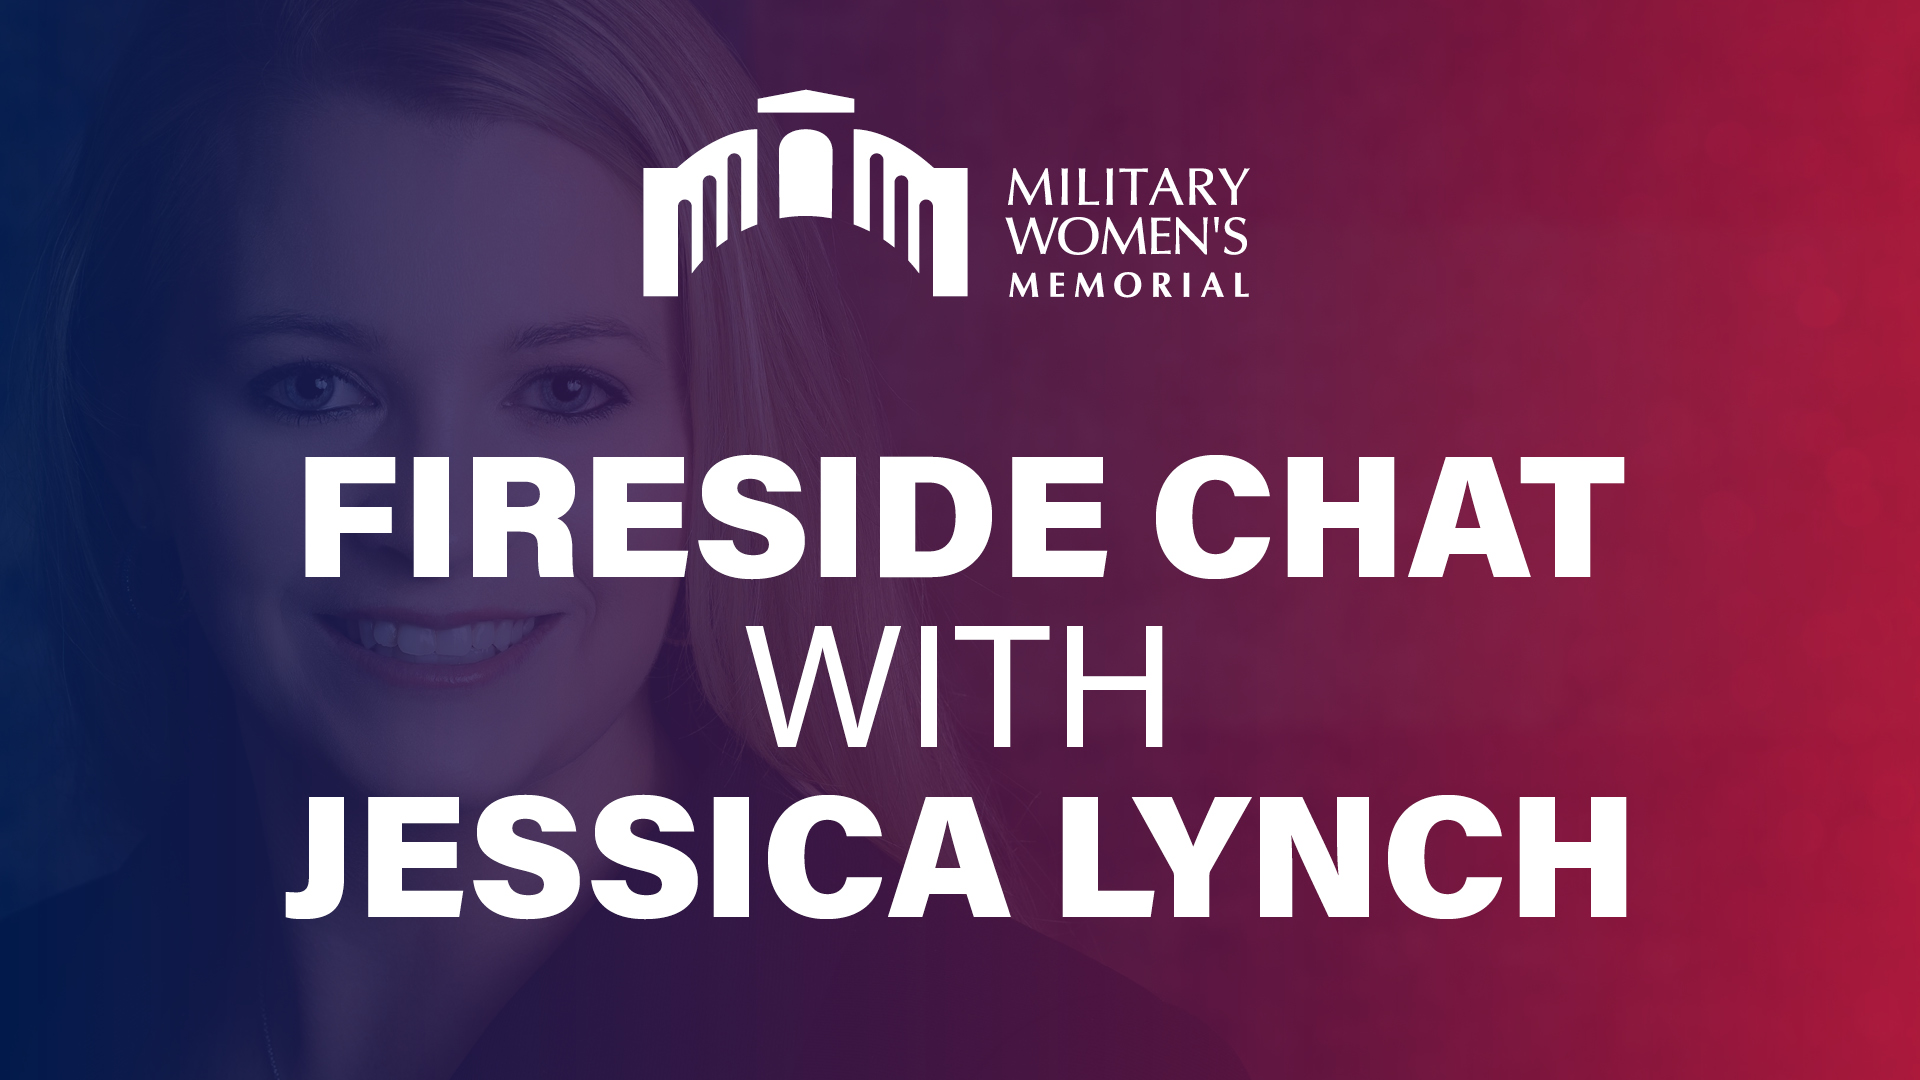 A photograph of Jessica Lynch faded into a ble/red background. The words " Fireside Chat with Jessica Lynch" in white.